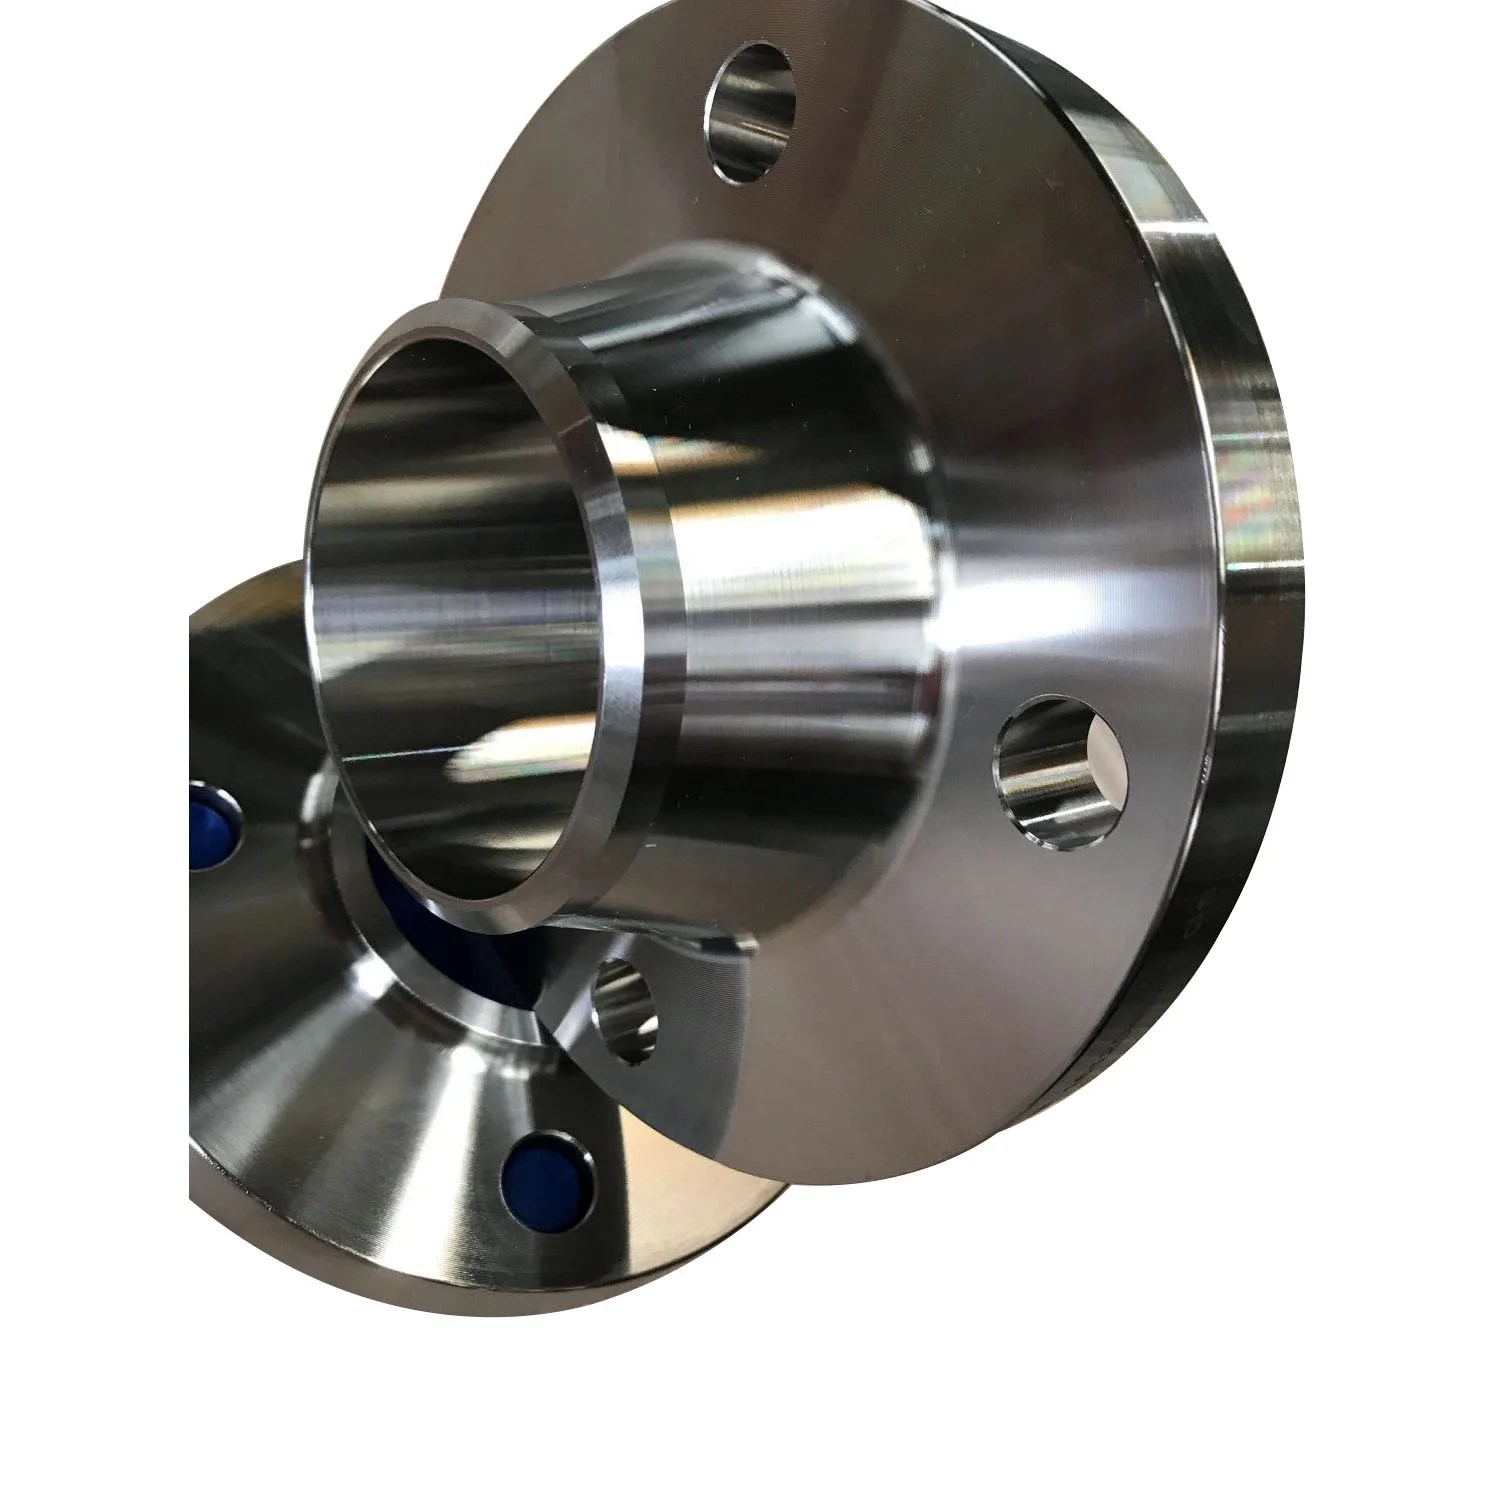 ANSI 316 Stainless Steel Weld dn6 pn10 flange